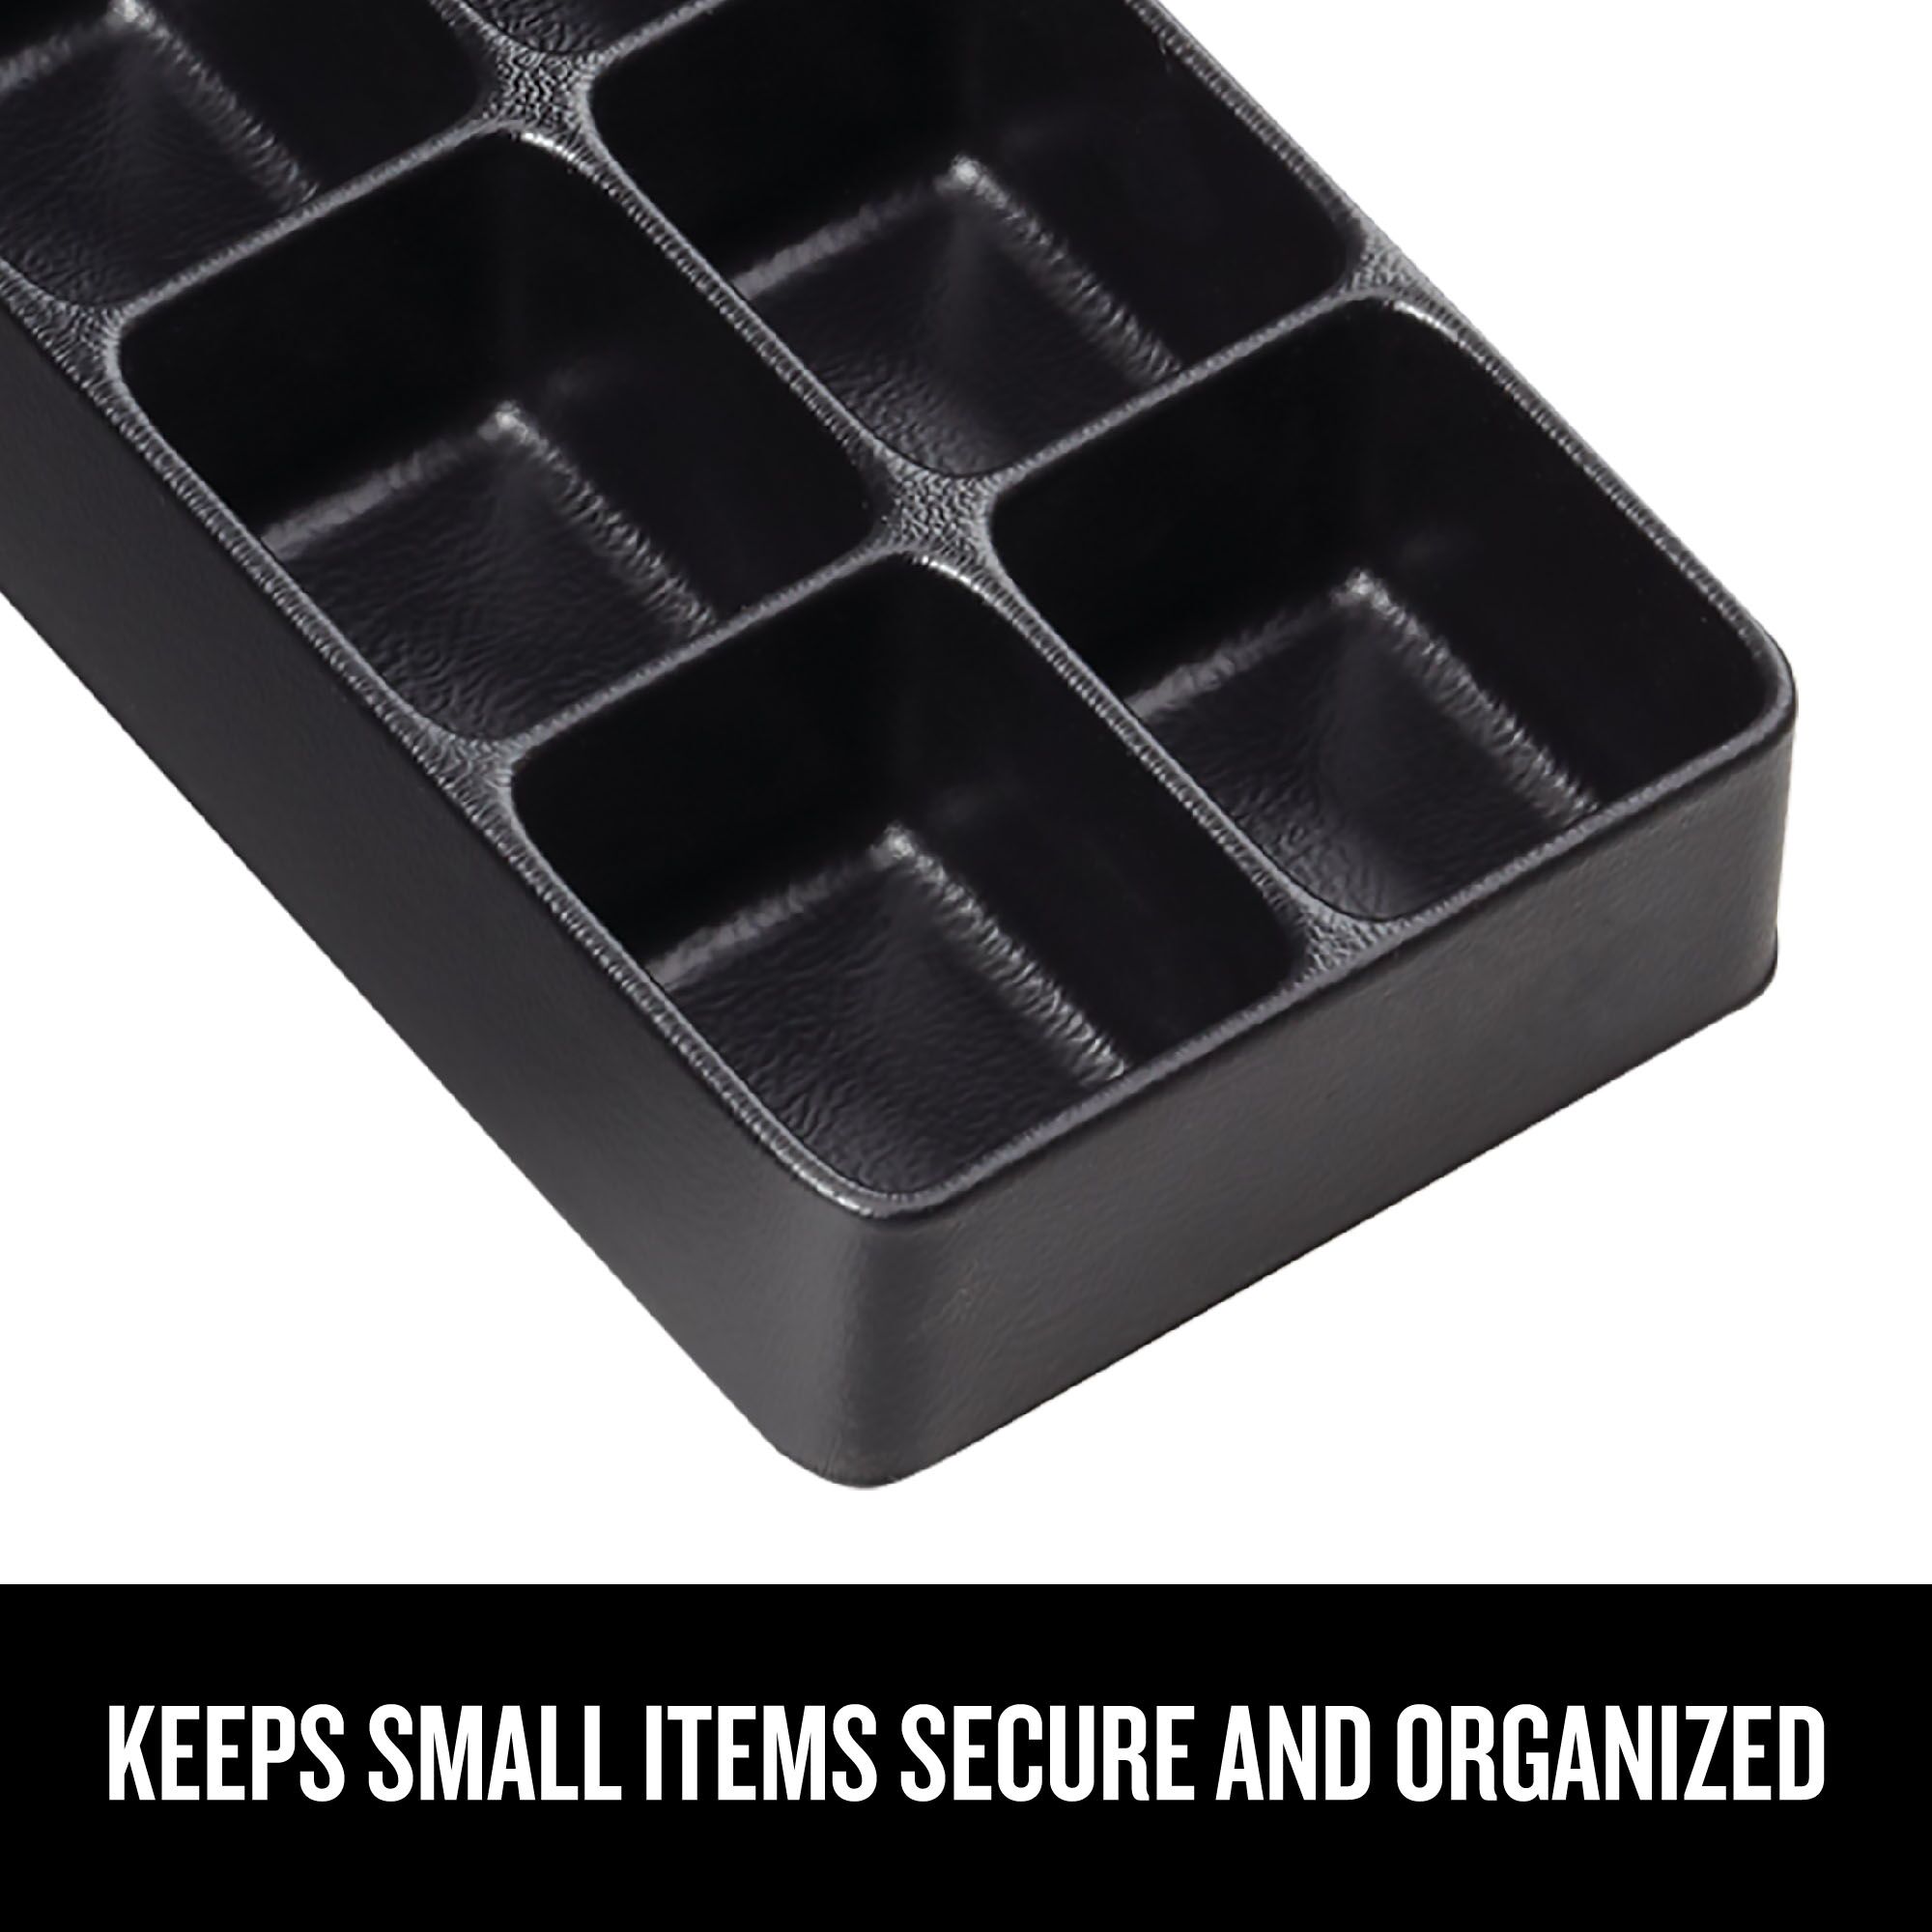 Keep small items secure and organized